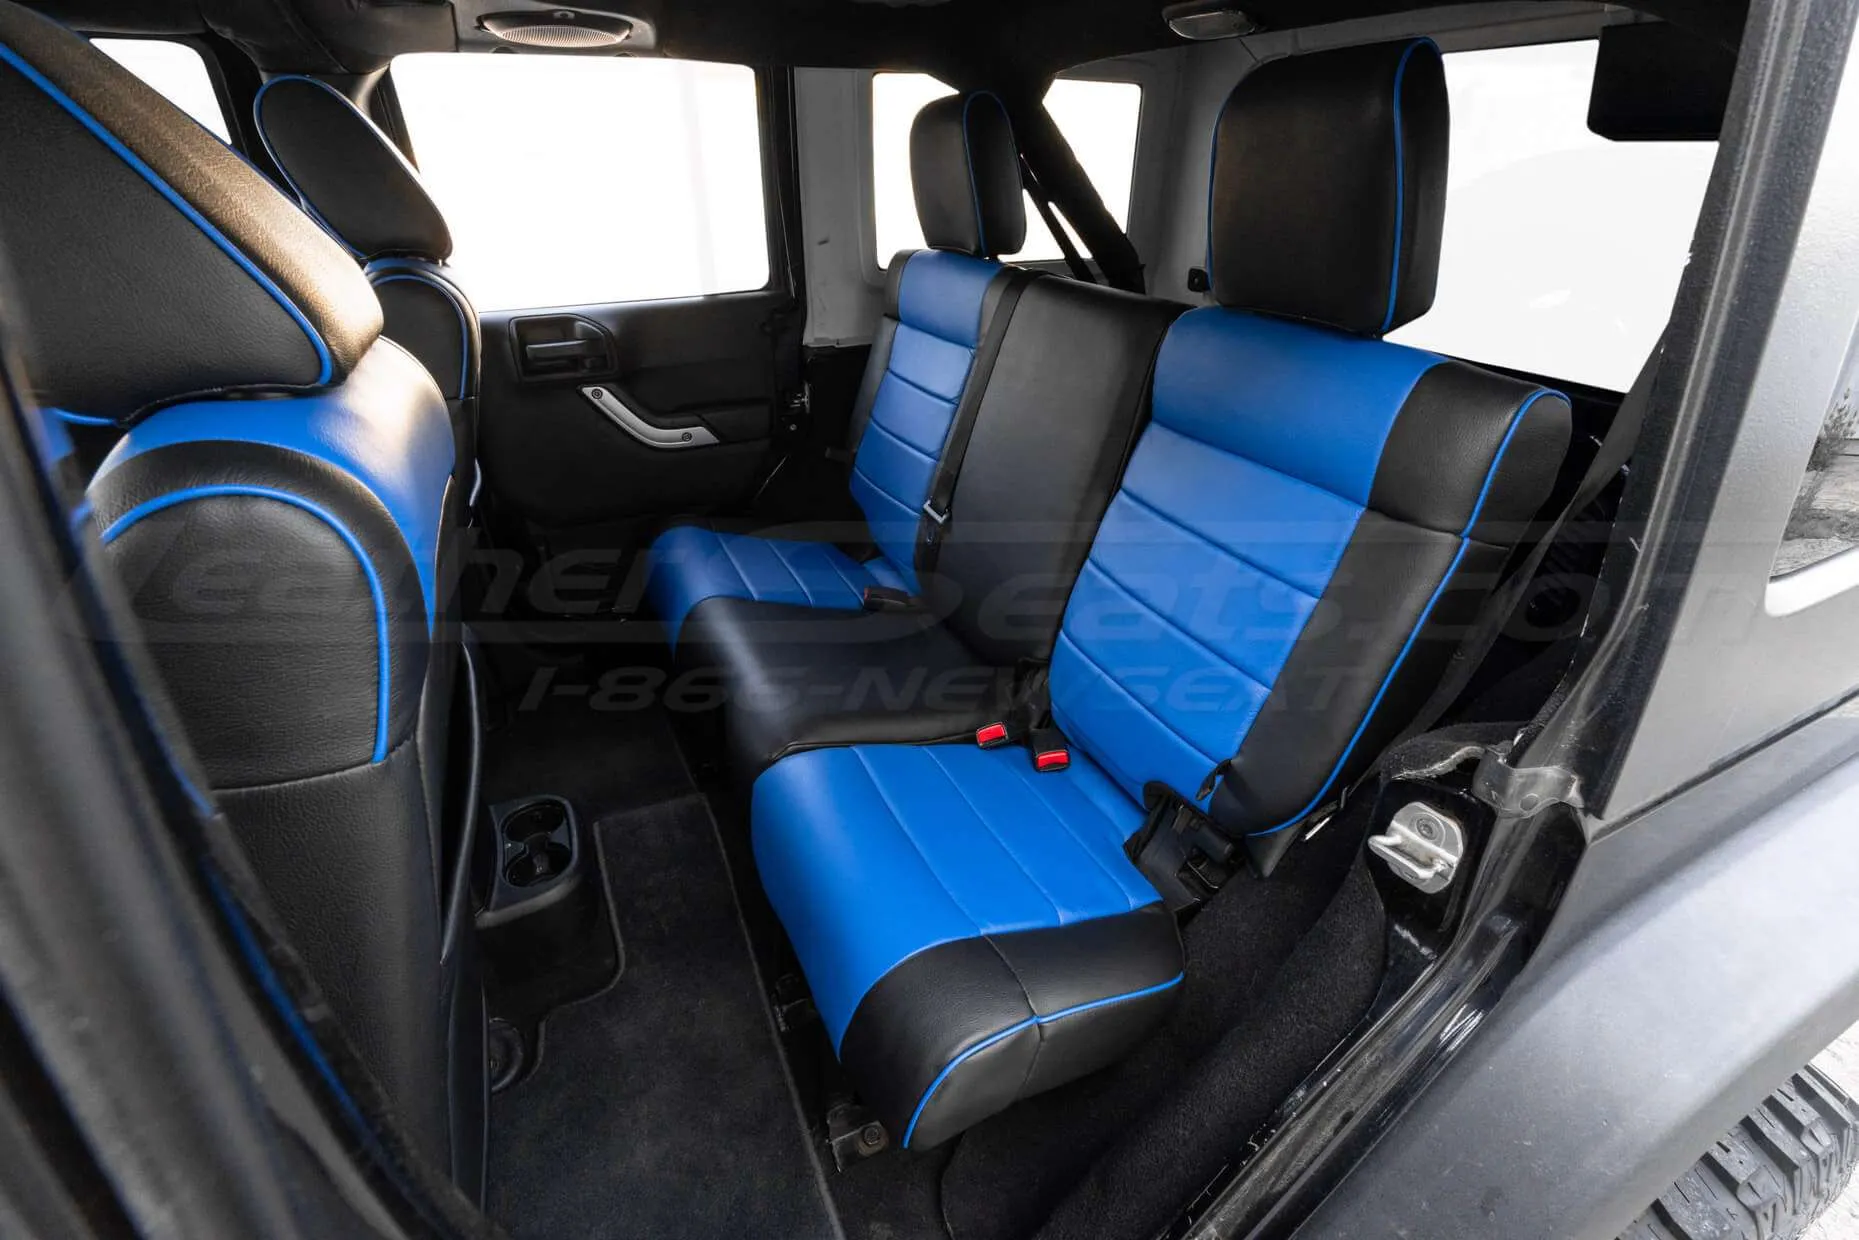 2013-2018 Jeep Wrangler JK Installed Custom Leather Seats - Rear seats from driver's side